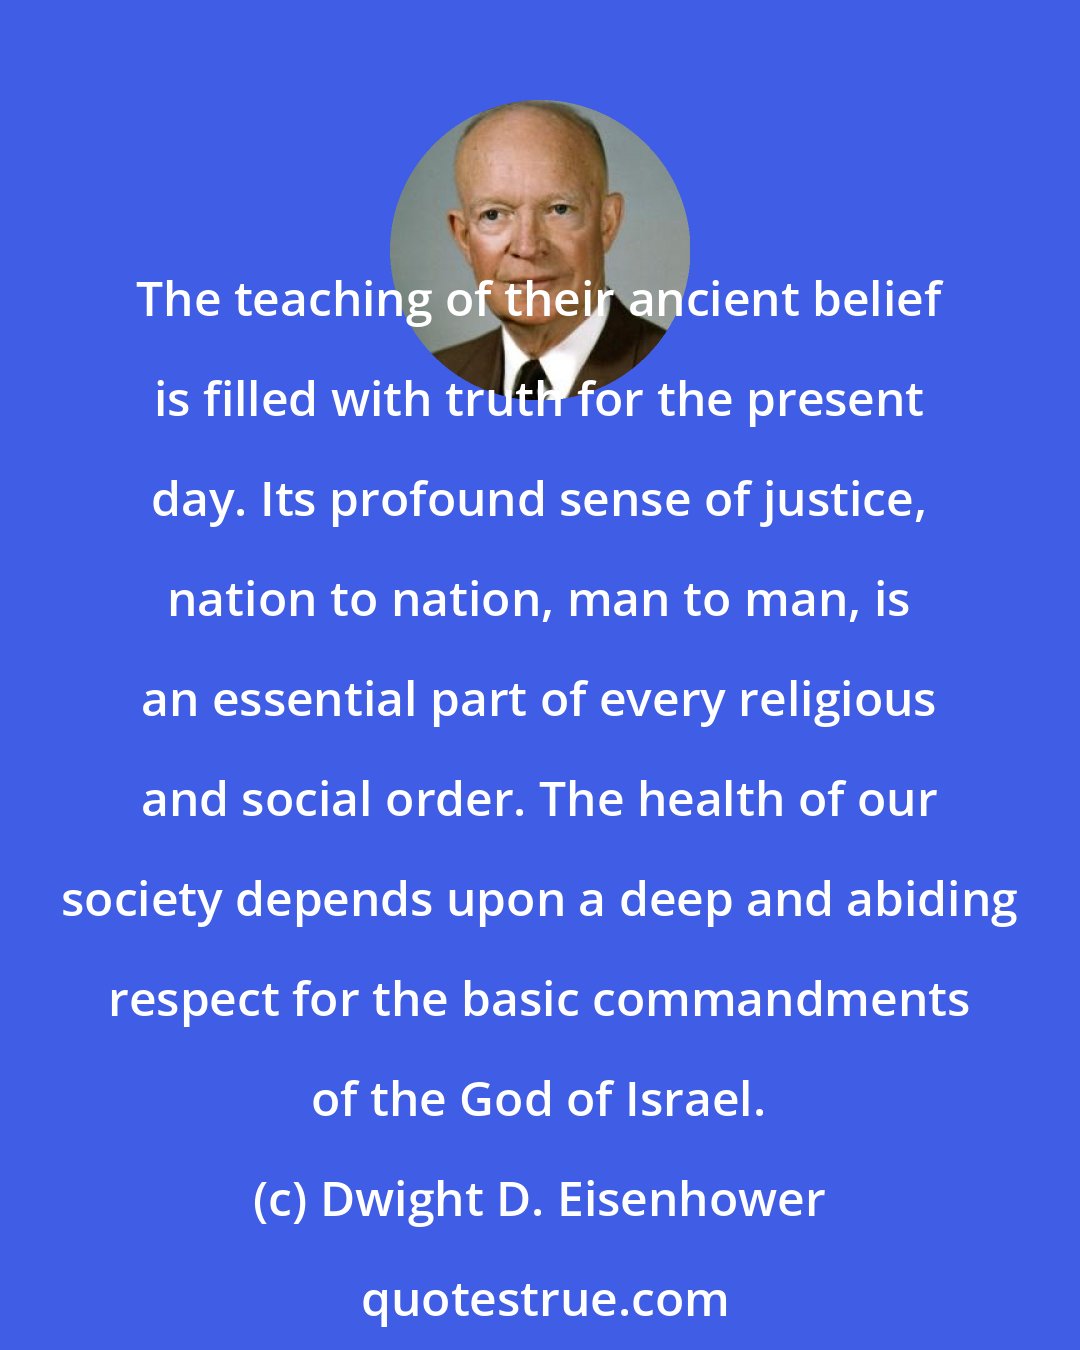 Dwight D. Eisenhower: The teaching of their ancient belief is filled with truth for the present day. Its profound sense of justice, nation to nation, man to man, is an essential part of every religious and social order. The health of our society depends upon a deep and abiding respect for the basic commandments of the God of Israel.